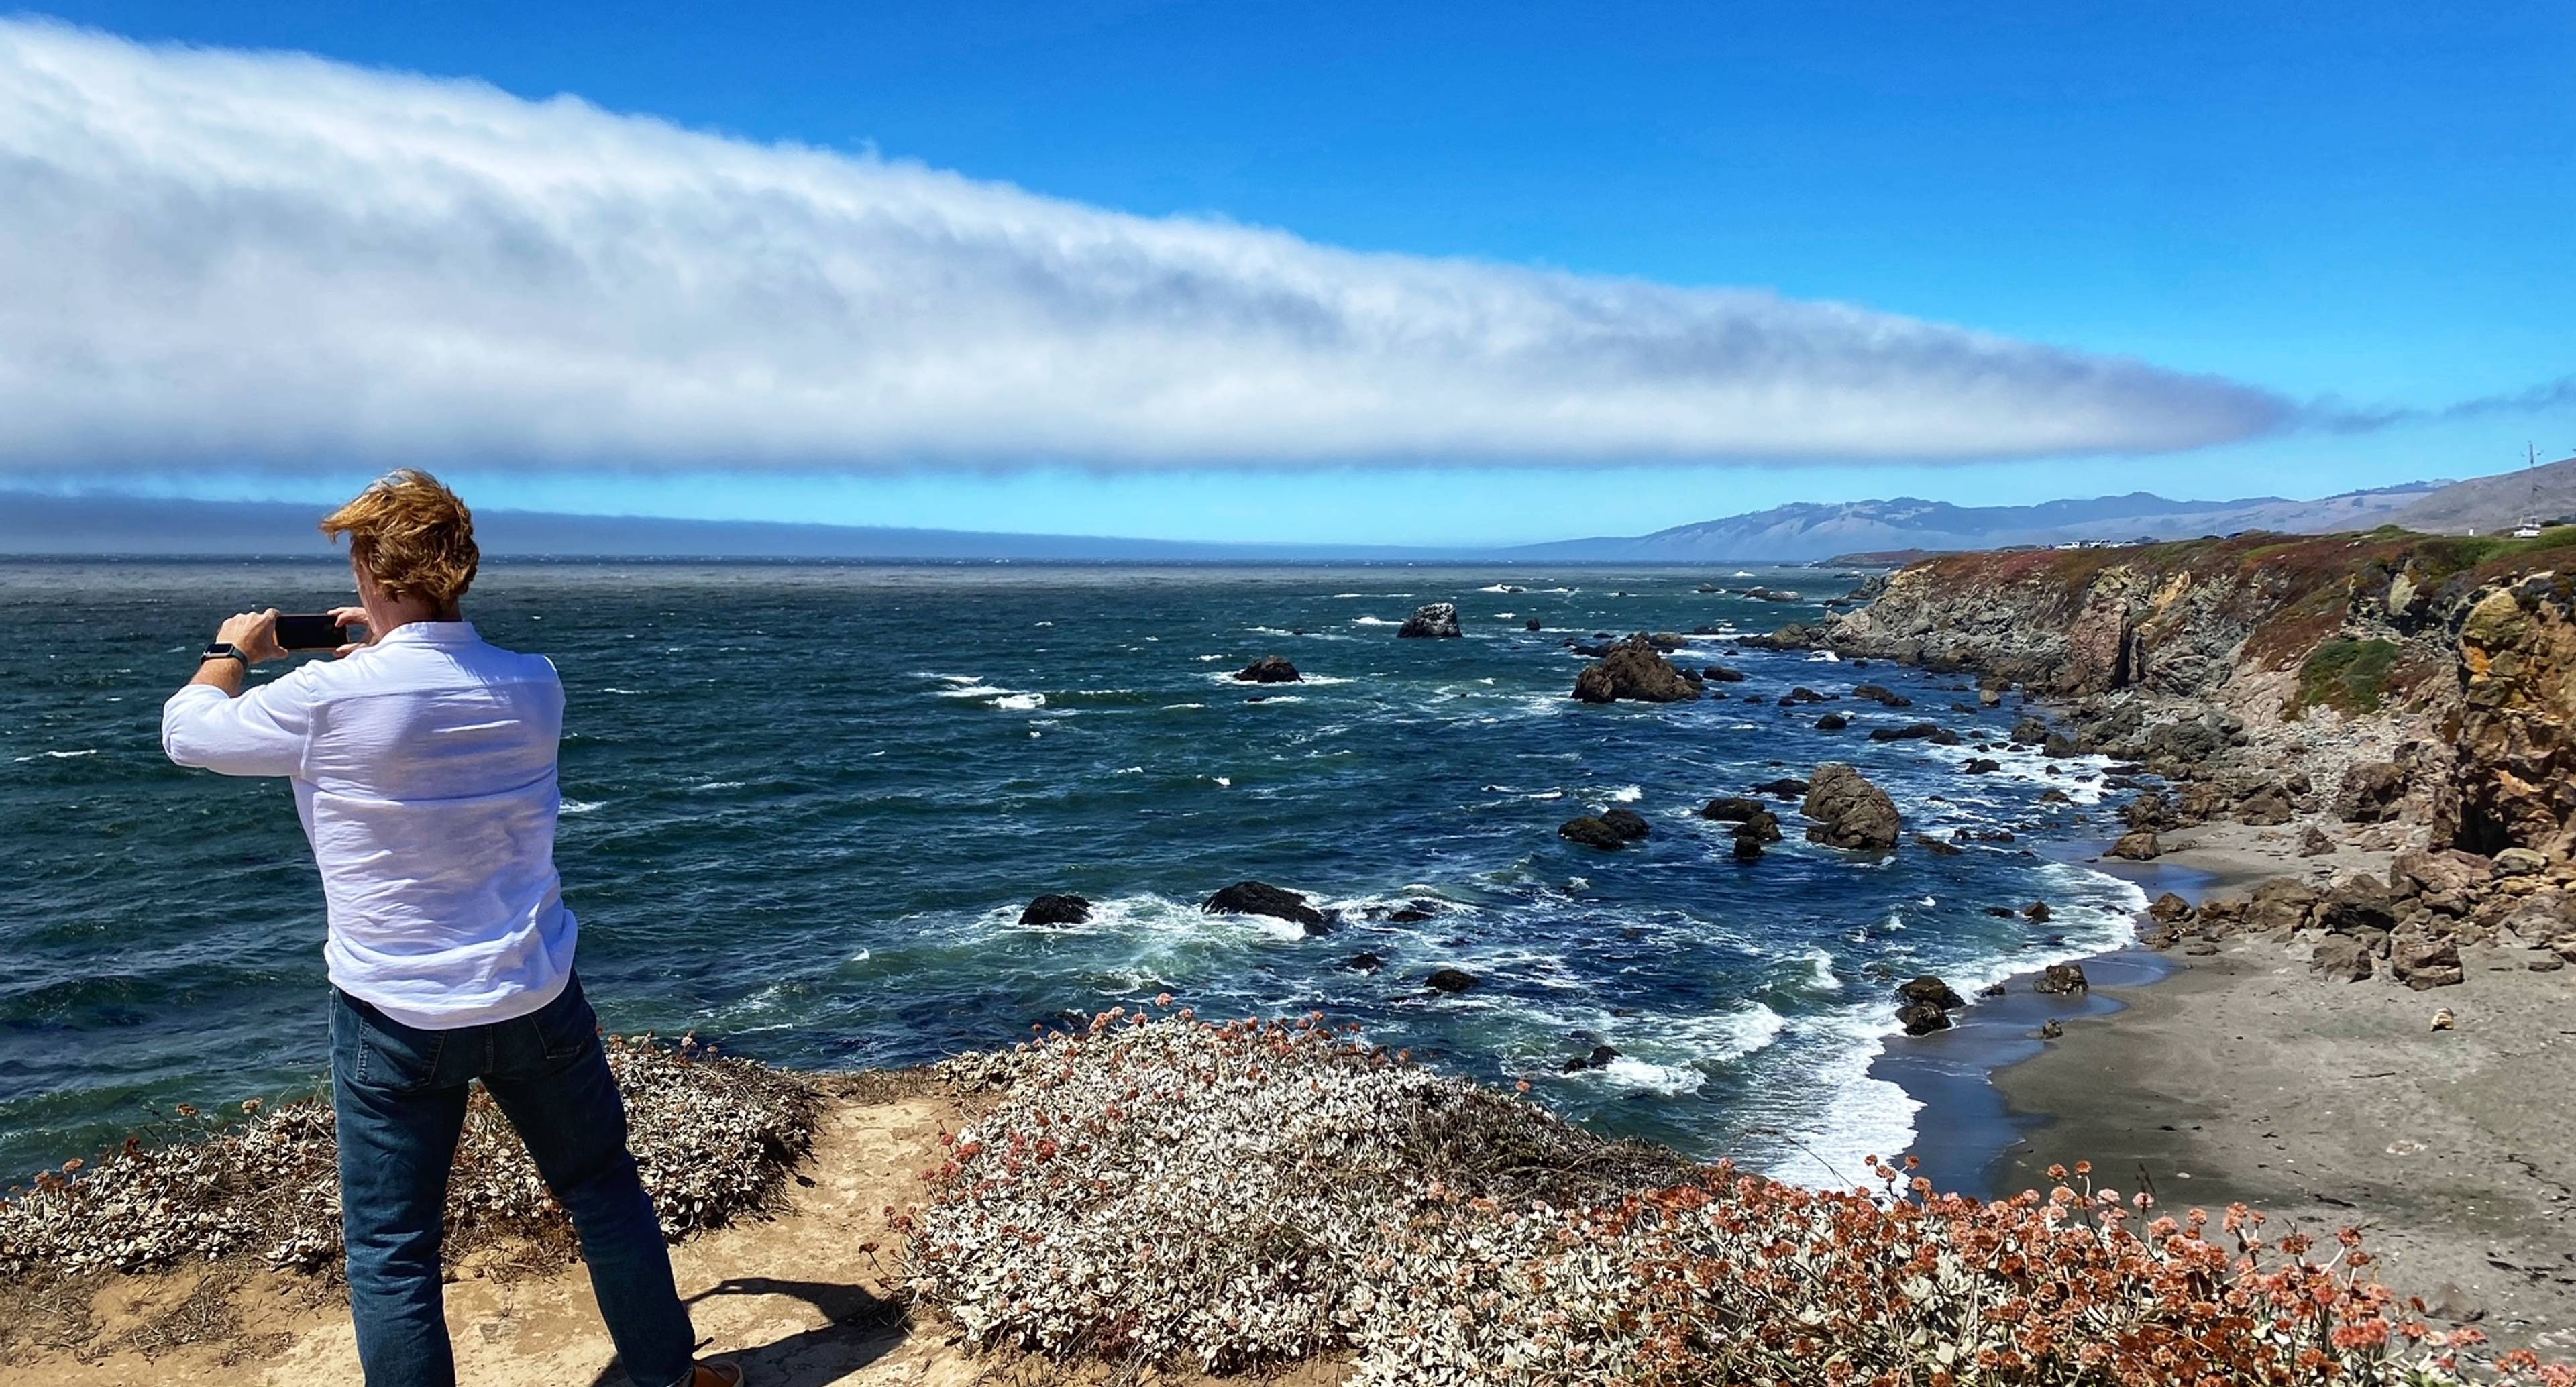 Sweeping Coastal Vistas, California History and the Avenue of the Giants